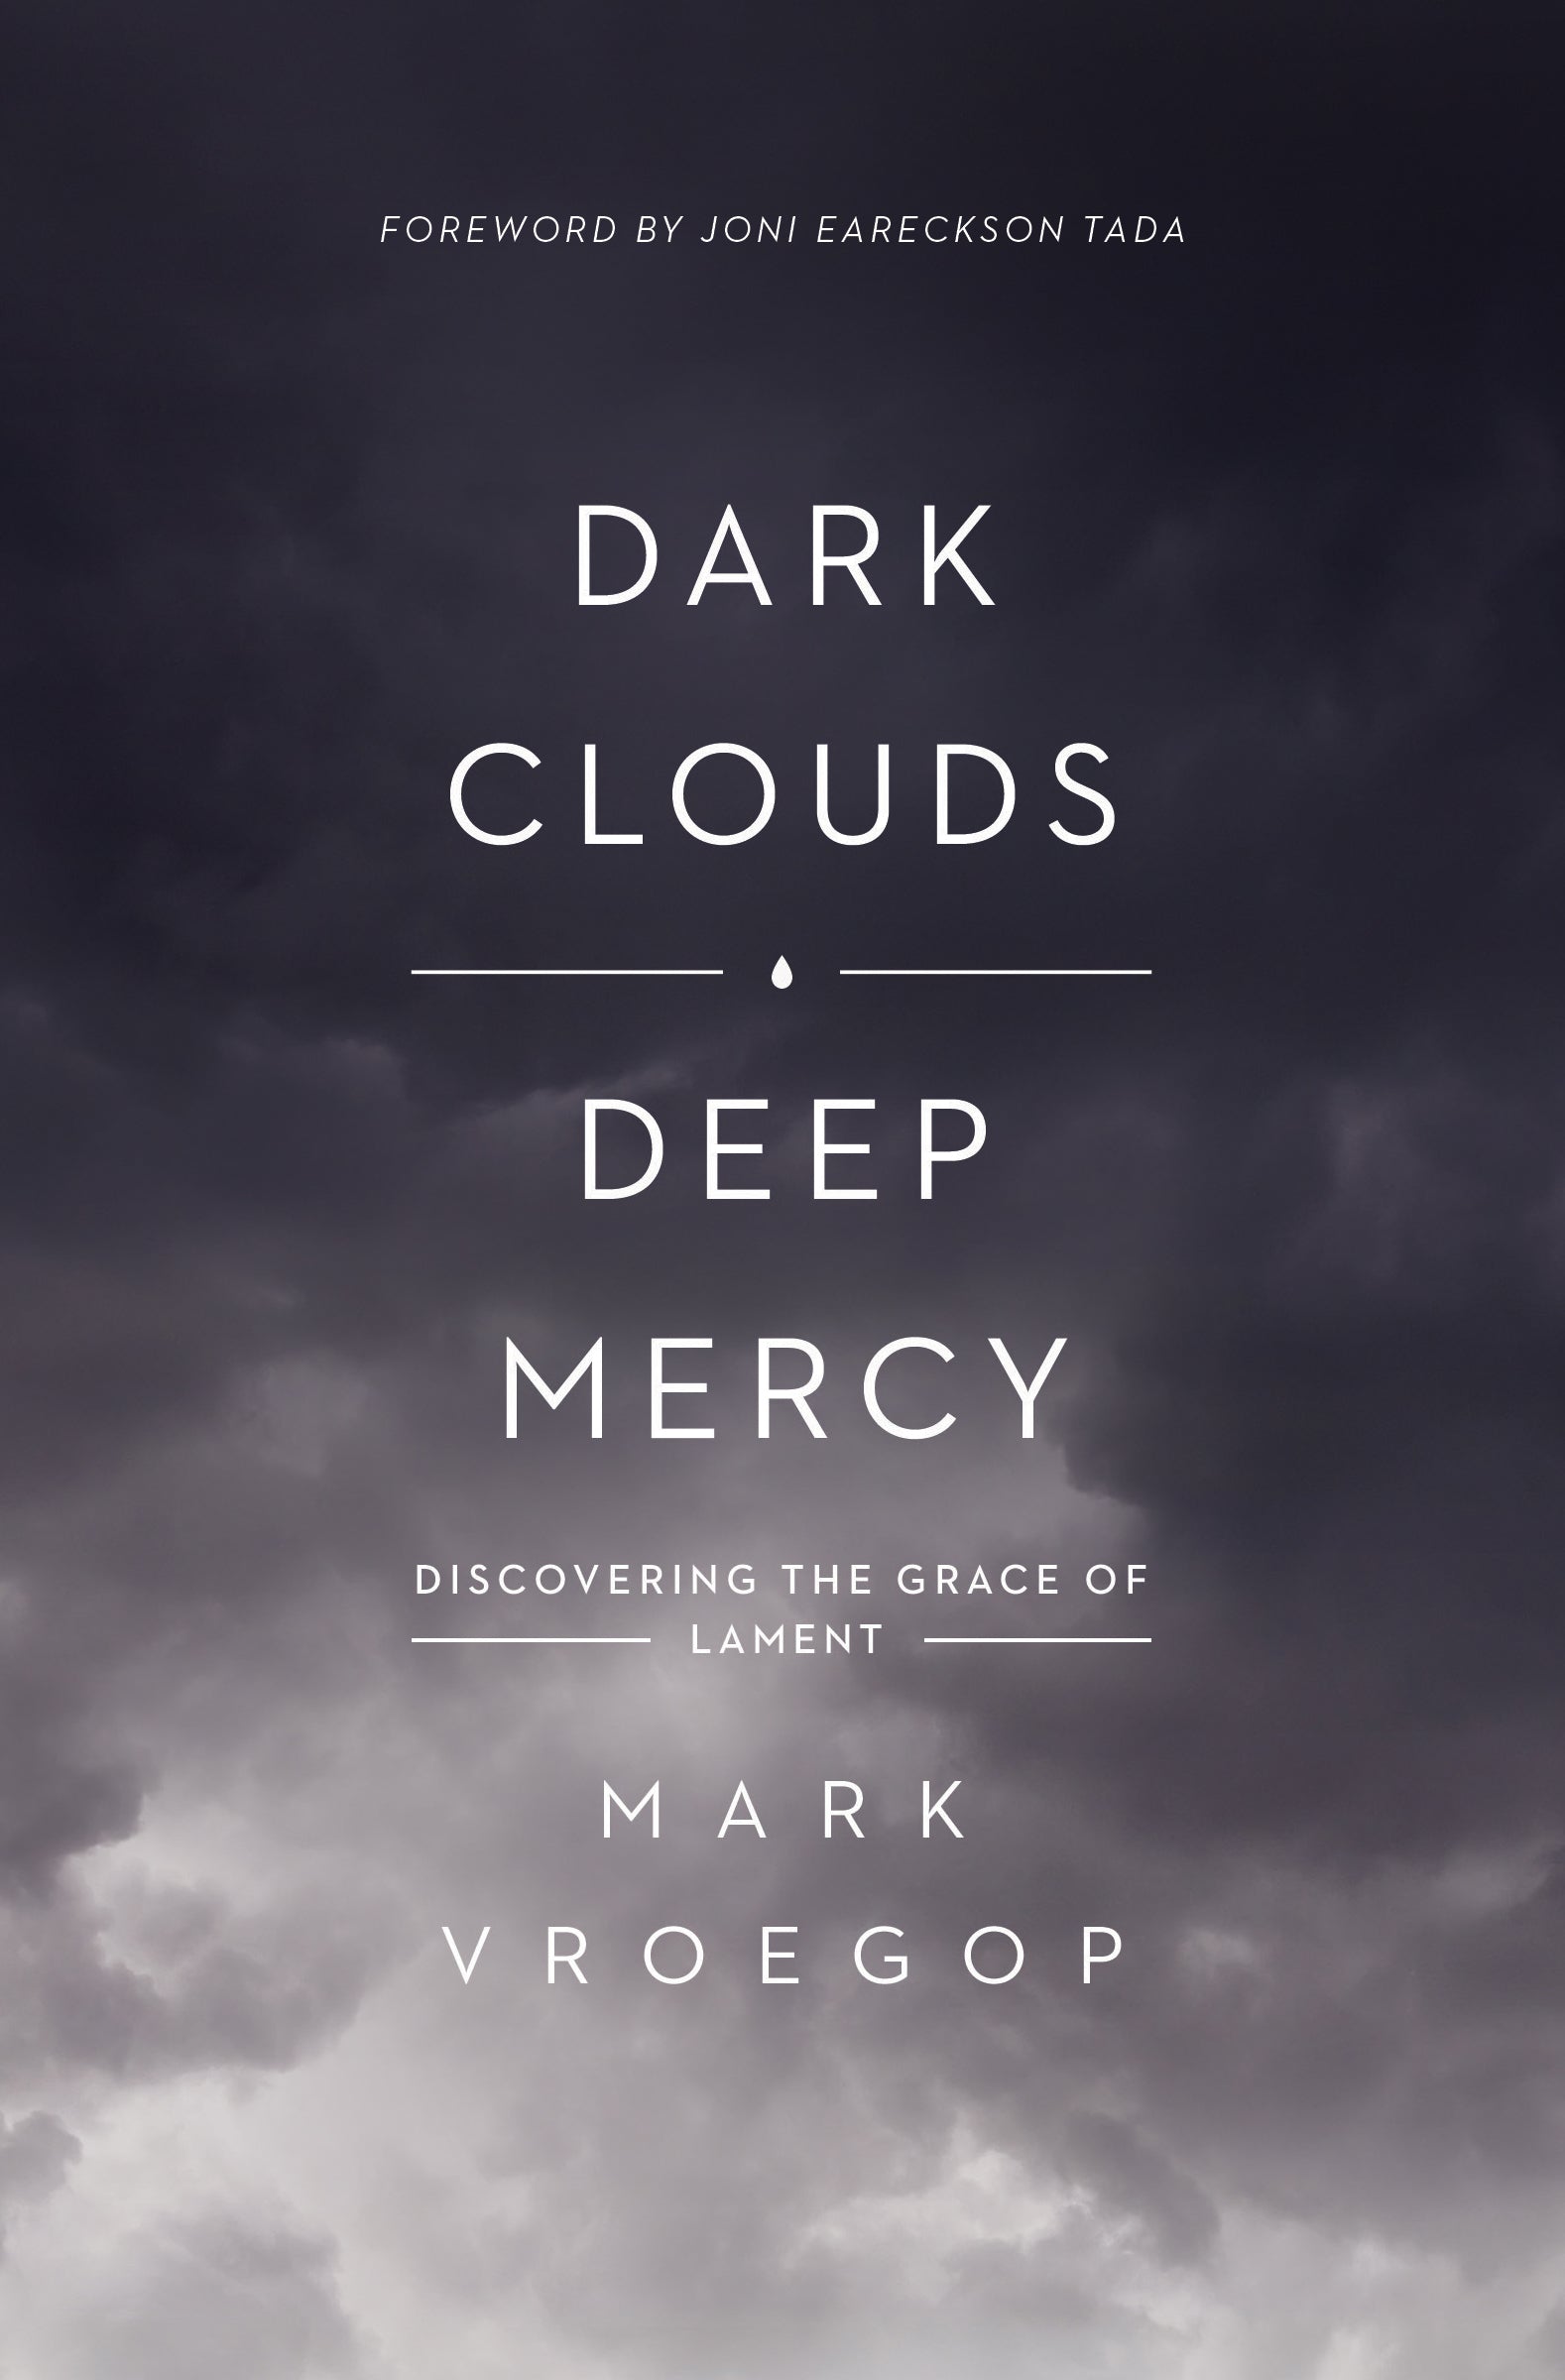 Image of Dark Clouds, Deep Mercy other